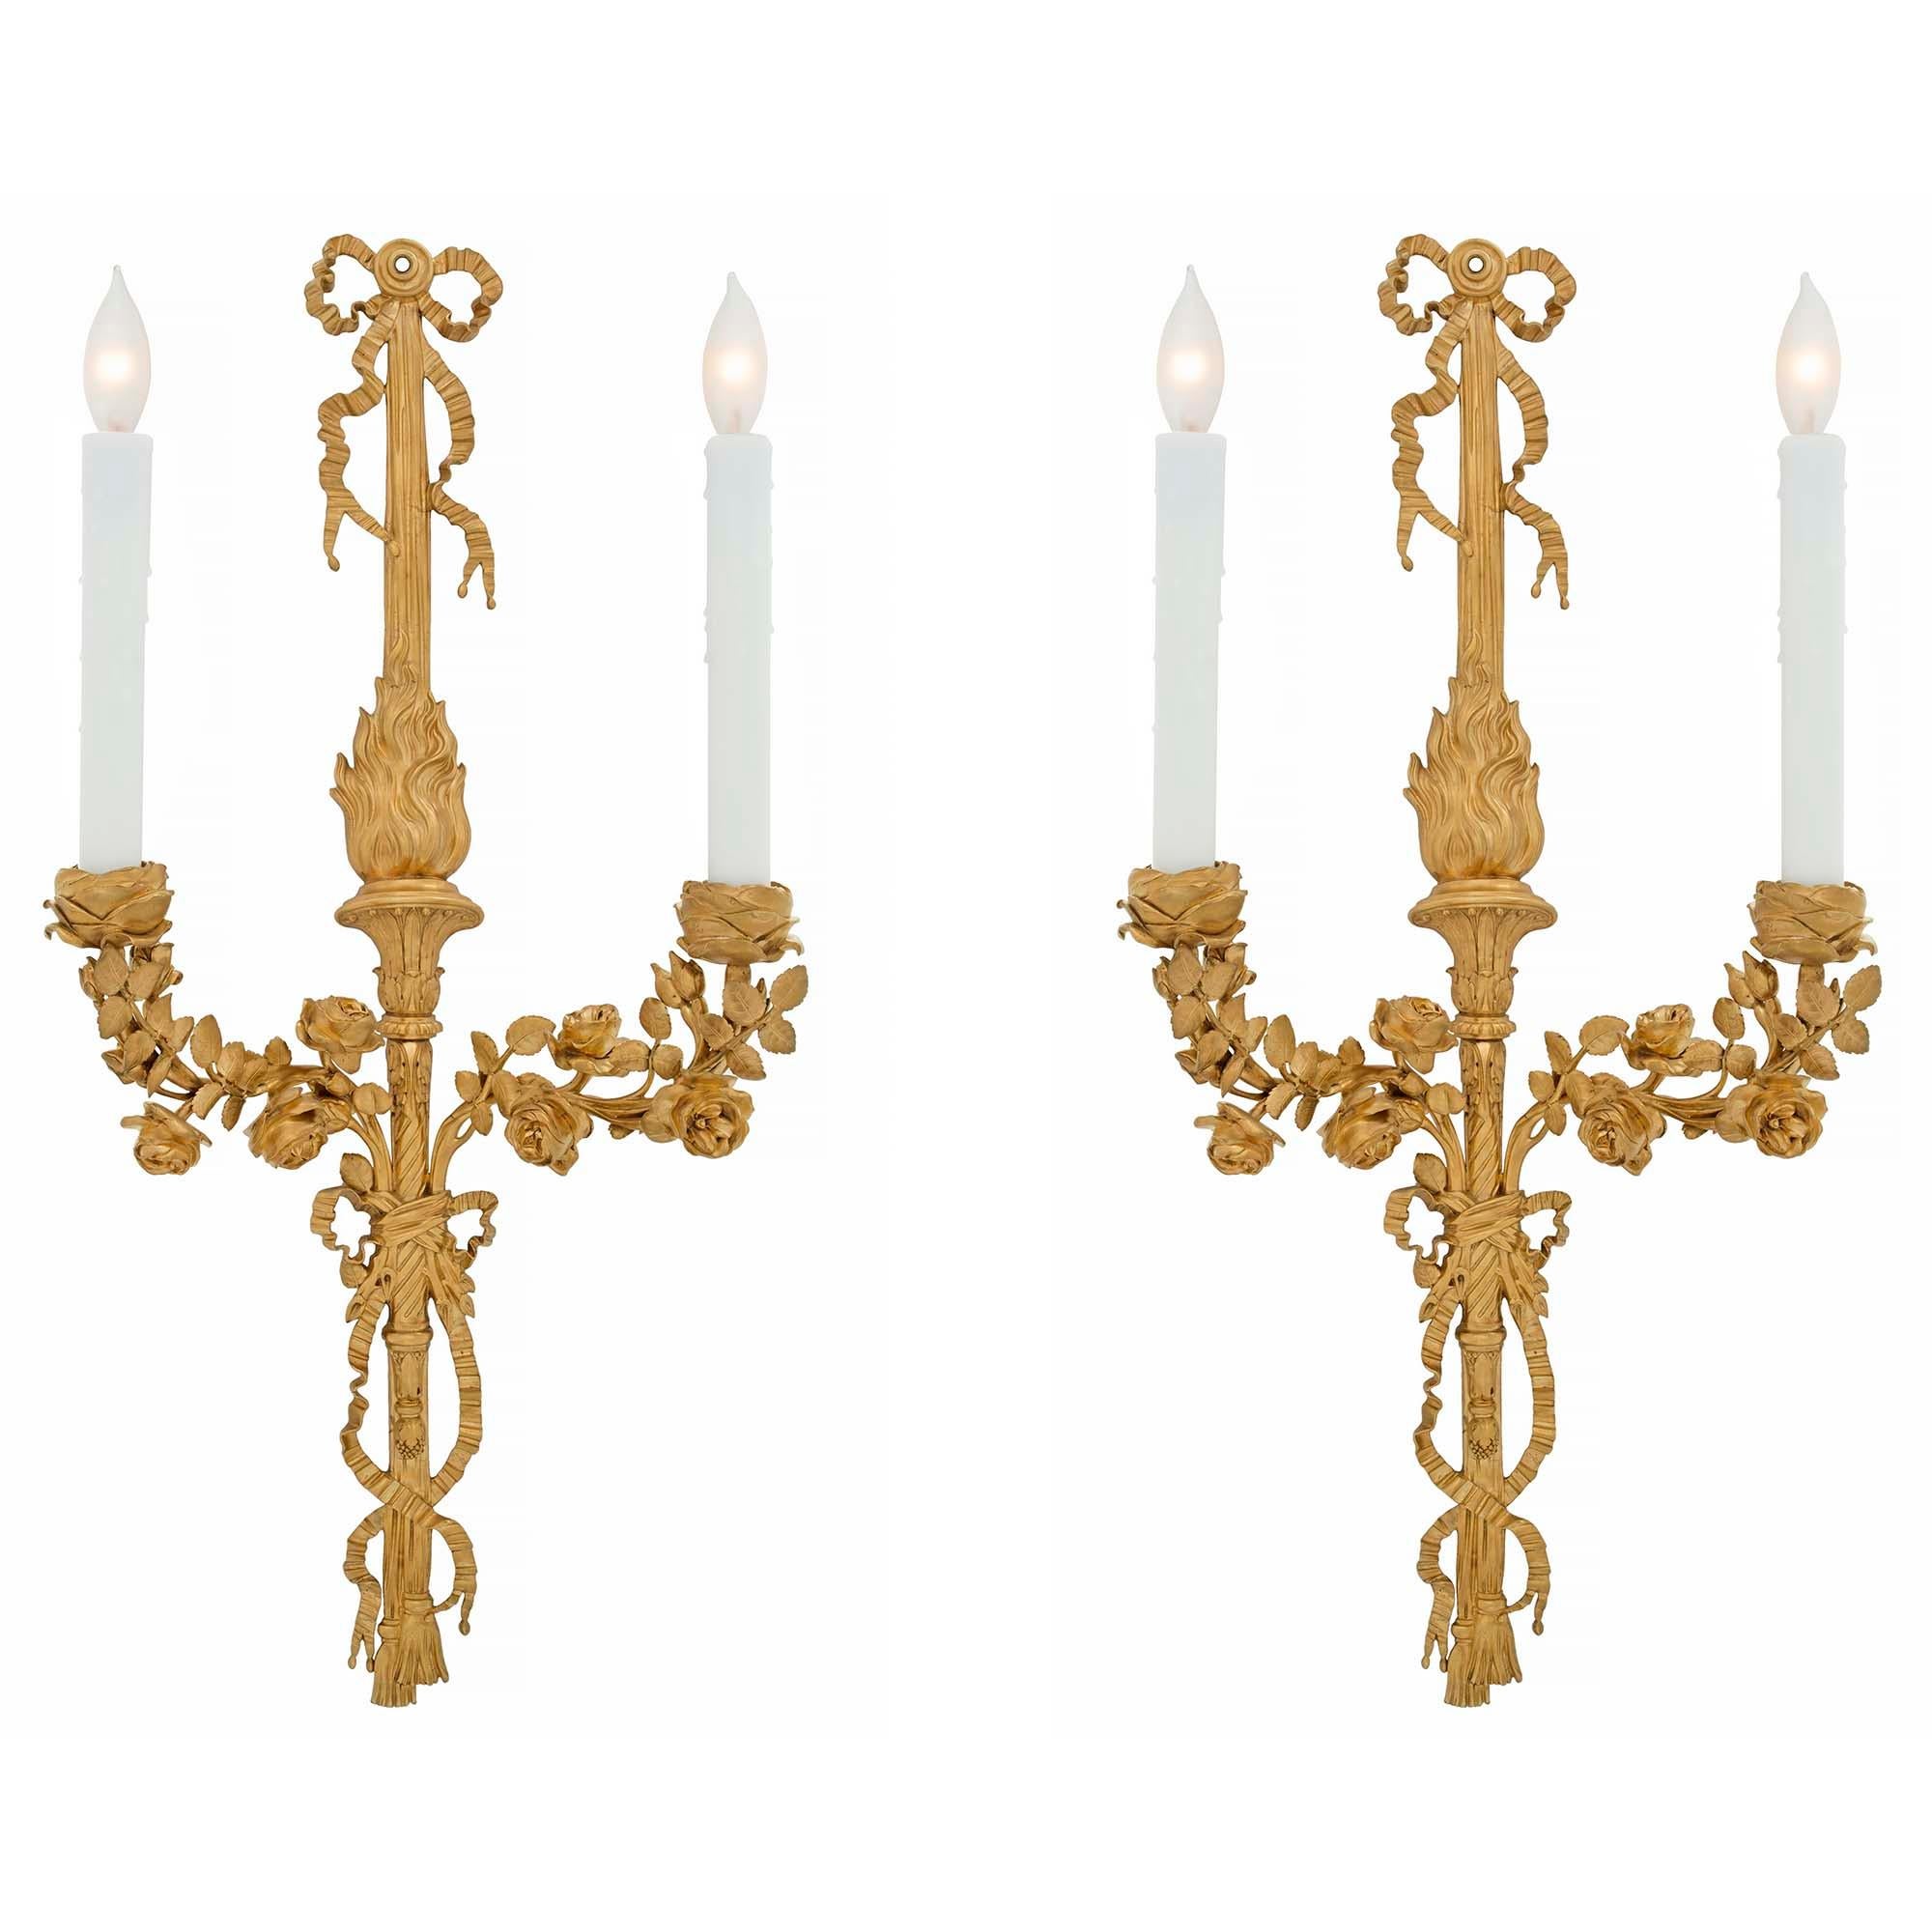 An elegant and high quality pair of French 19th century Louis XVI style two arm ormolu sconces. Each scone is centered by fine tassels below a tied ribbon design and acorn finial. The arms display impressive and richly chased detailed etched flowers